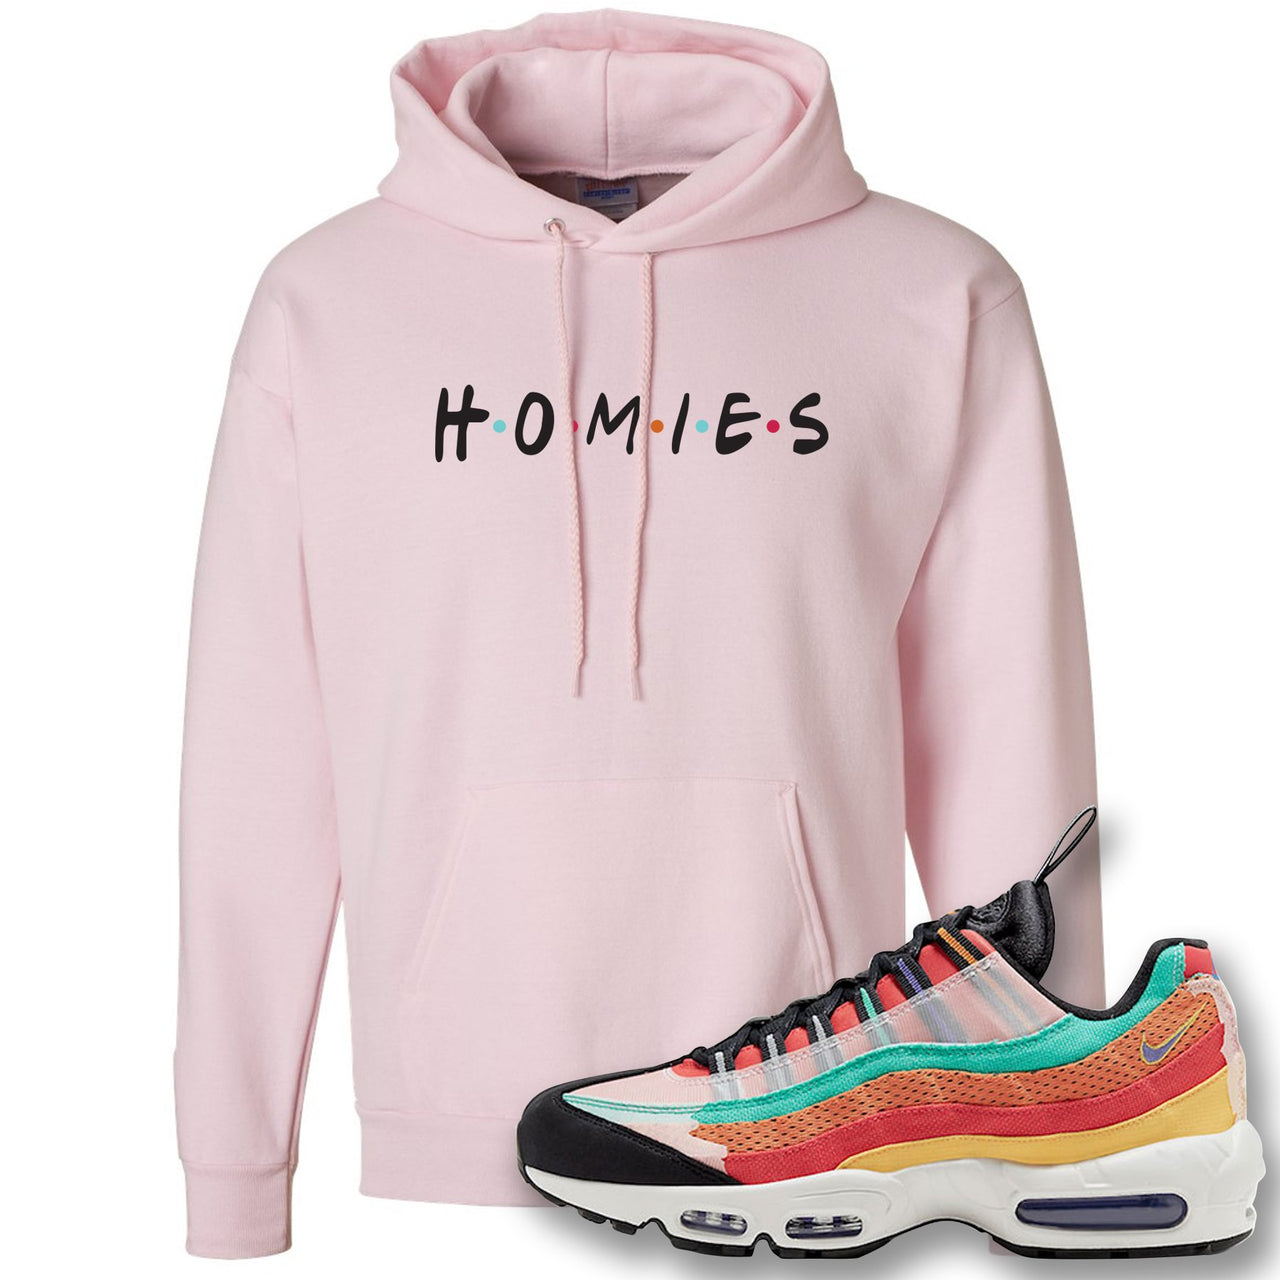 Air Max 95 Black History Month Sneaker Classic Pink Pullover Hoodie | Hoodie to match Nike Air Max 95 Black History Month Shoes | Homies